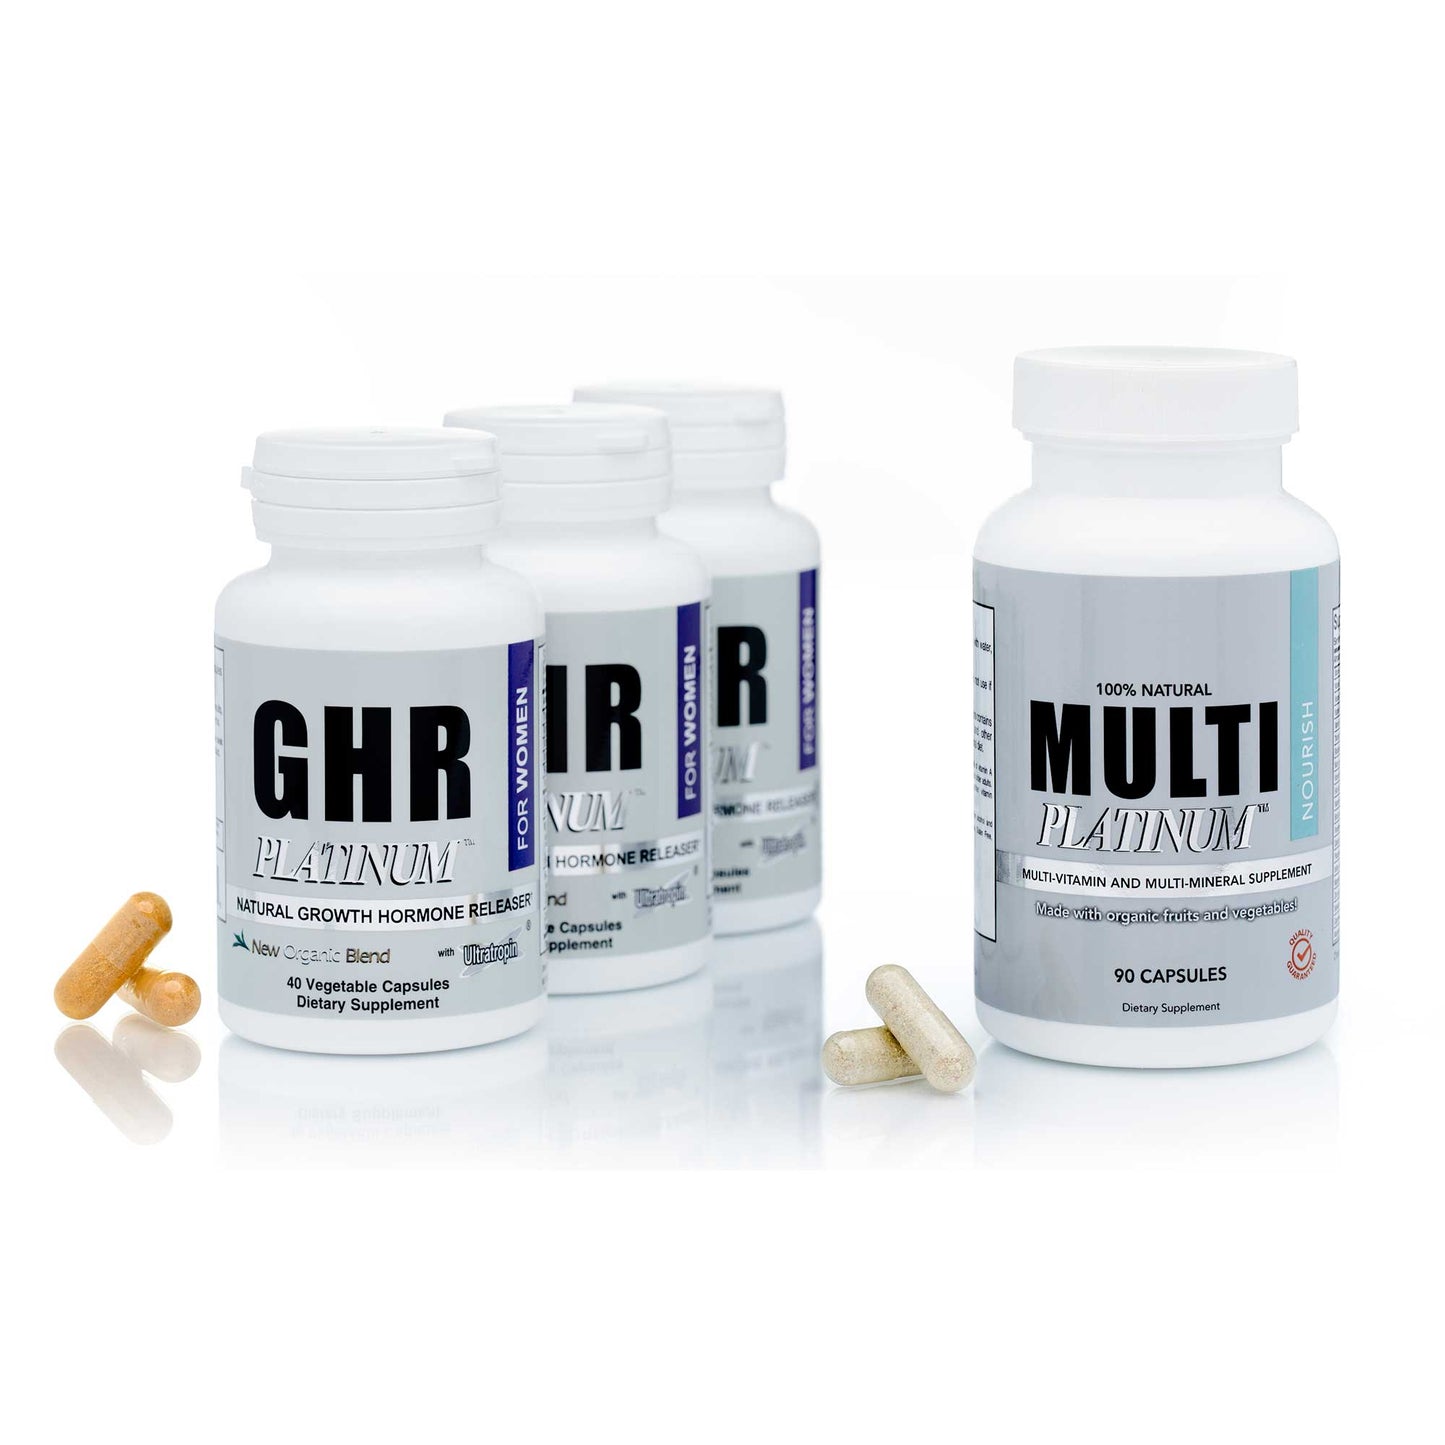 GHR Platinum for Women 90 day supply - free multivitamins included